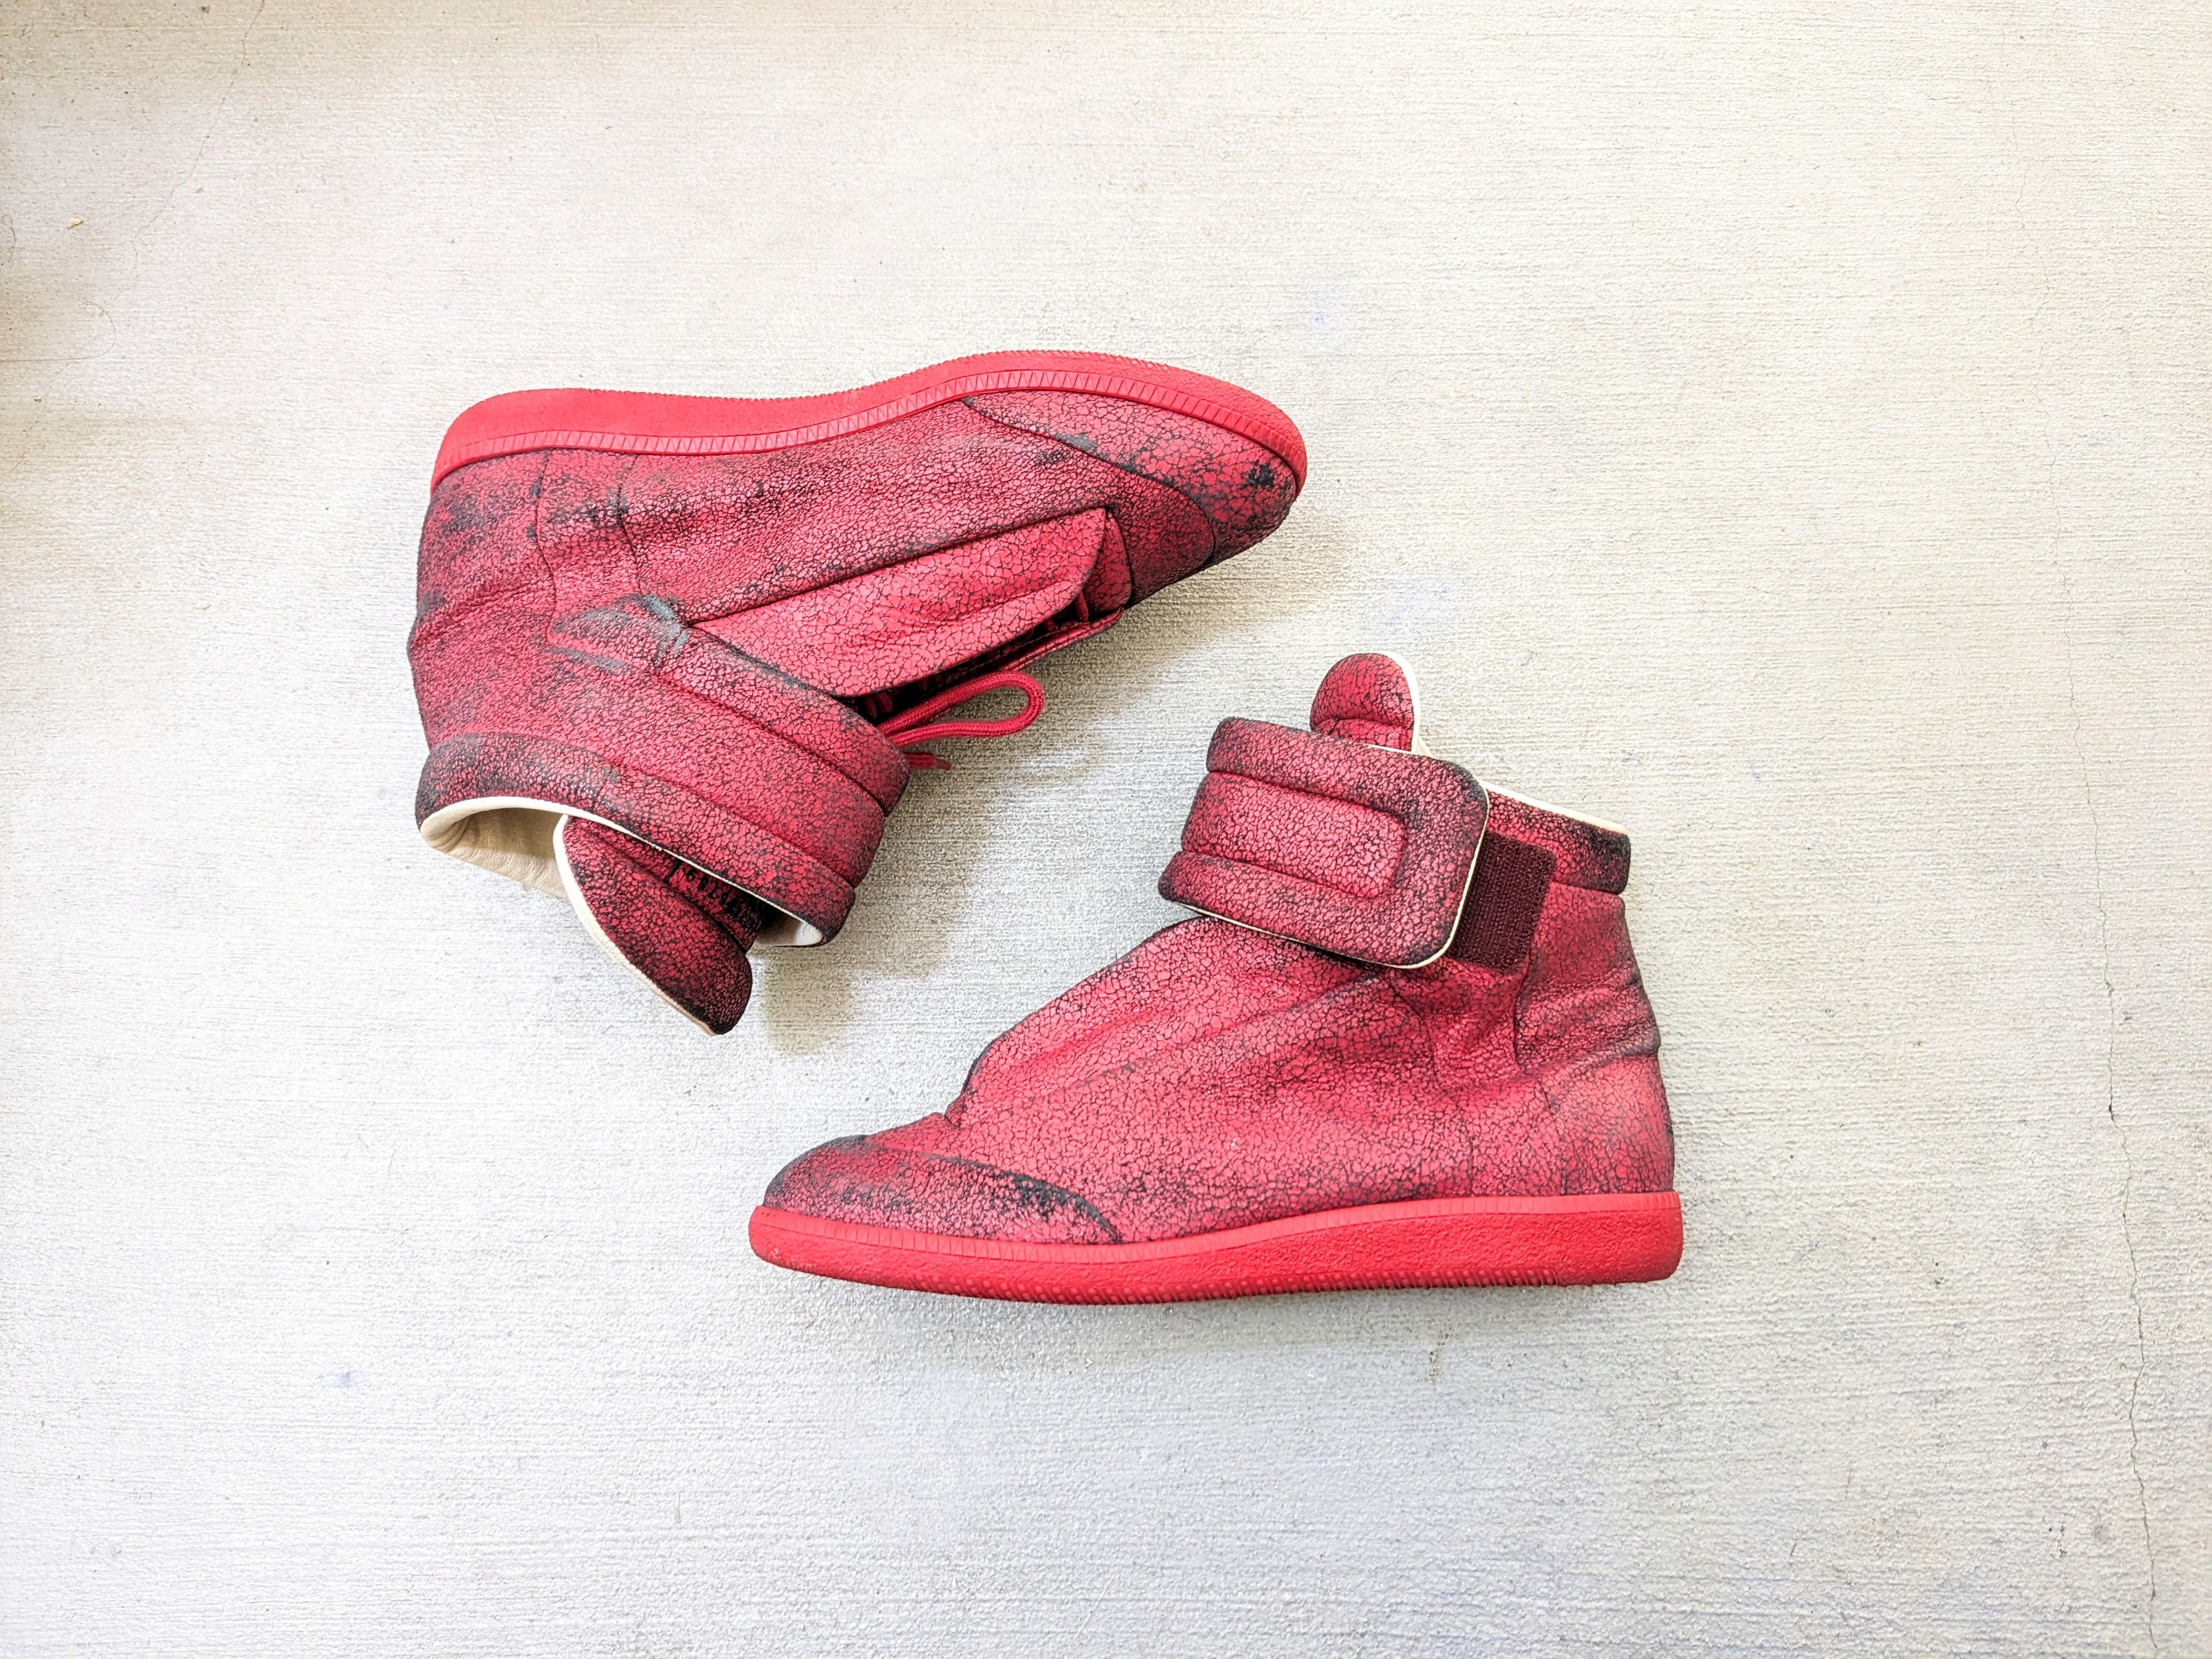 Pre-owned Maison Margiela Future High Tops Size 9 Red Leather Suede Shoes